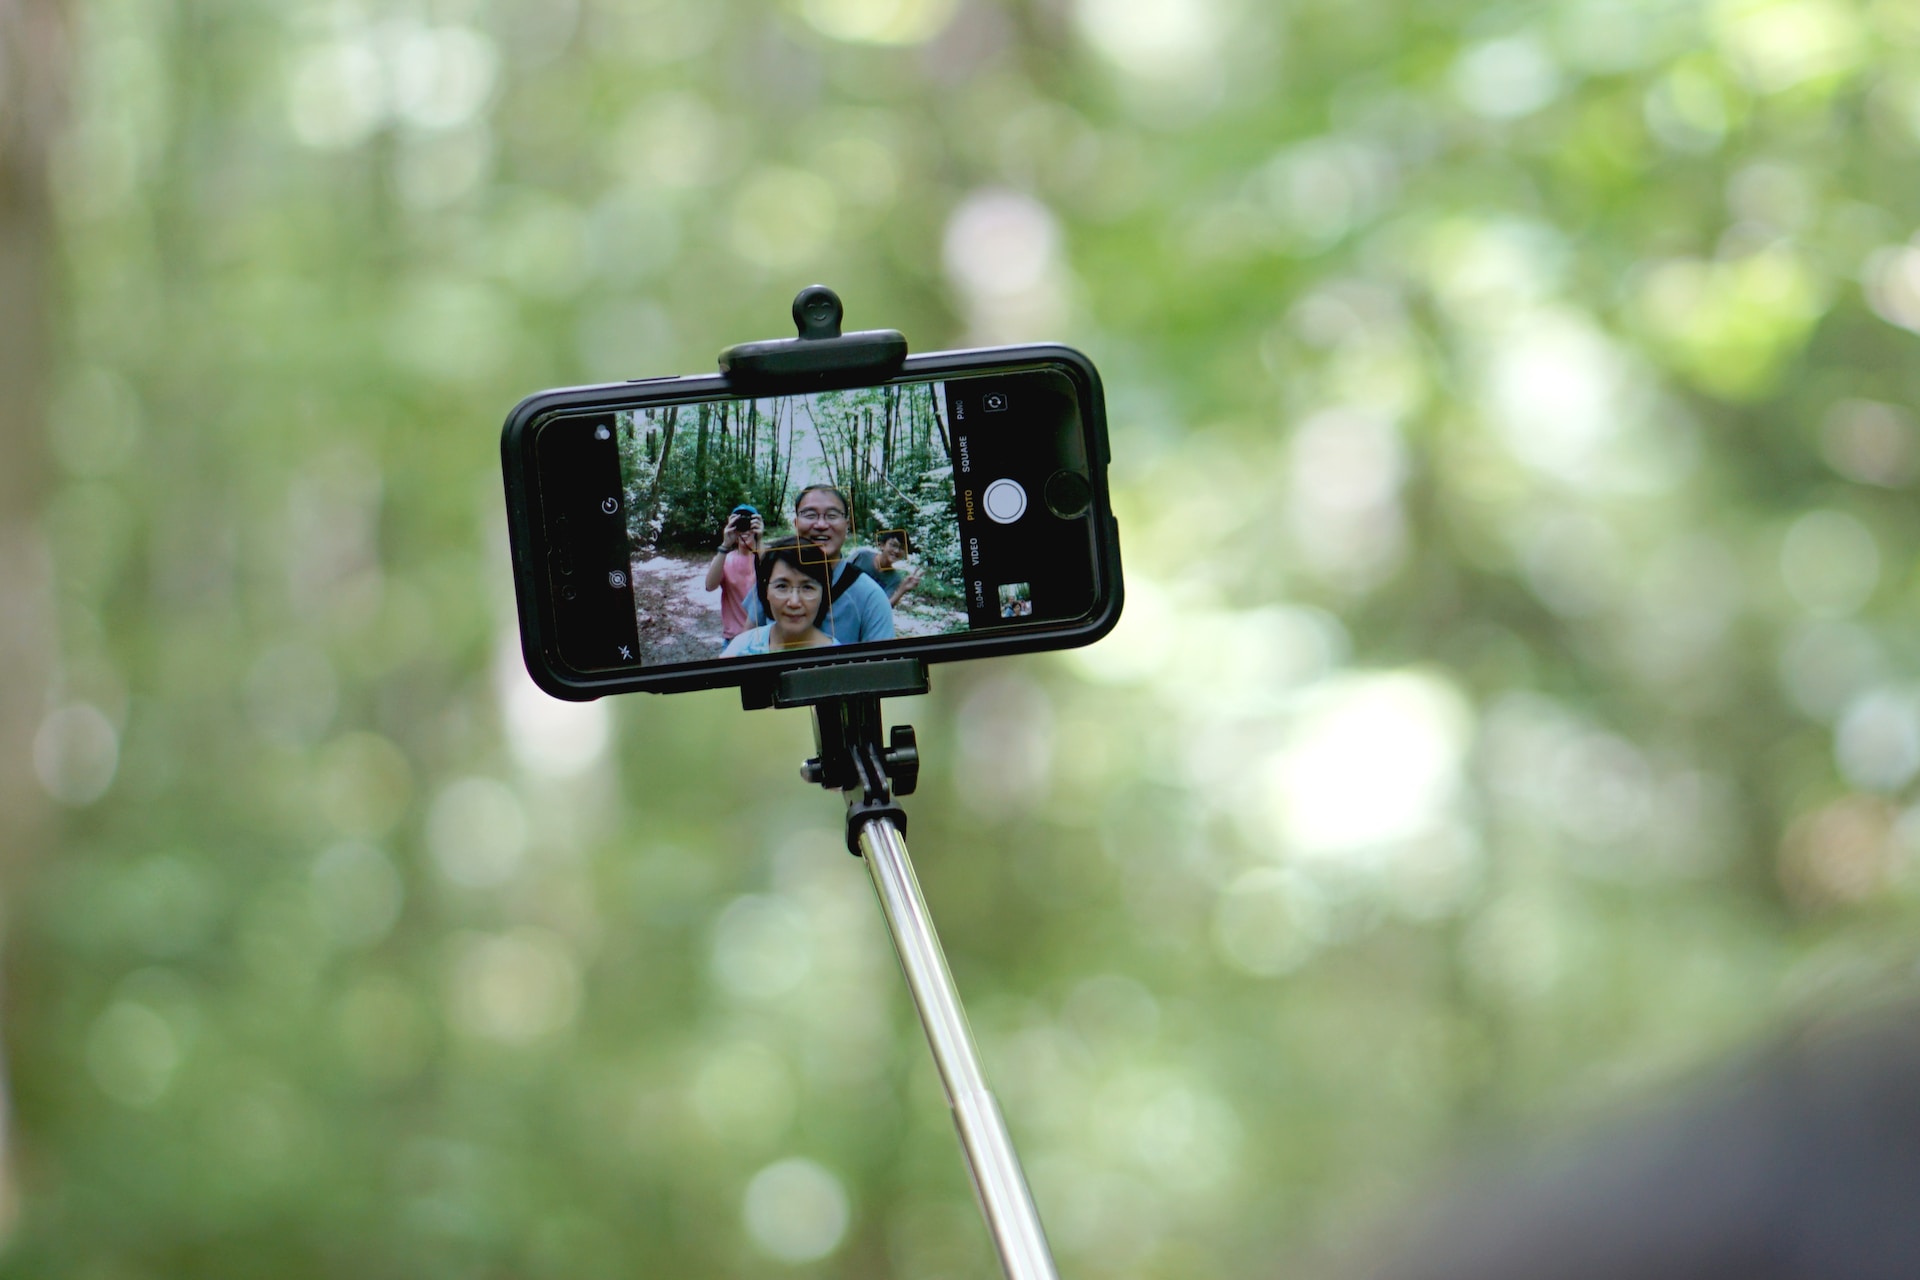 A selfie stick is used to take photographs or video by positioning a digital camera device, typically a smartphone, beyond the normal range of the arm